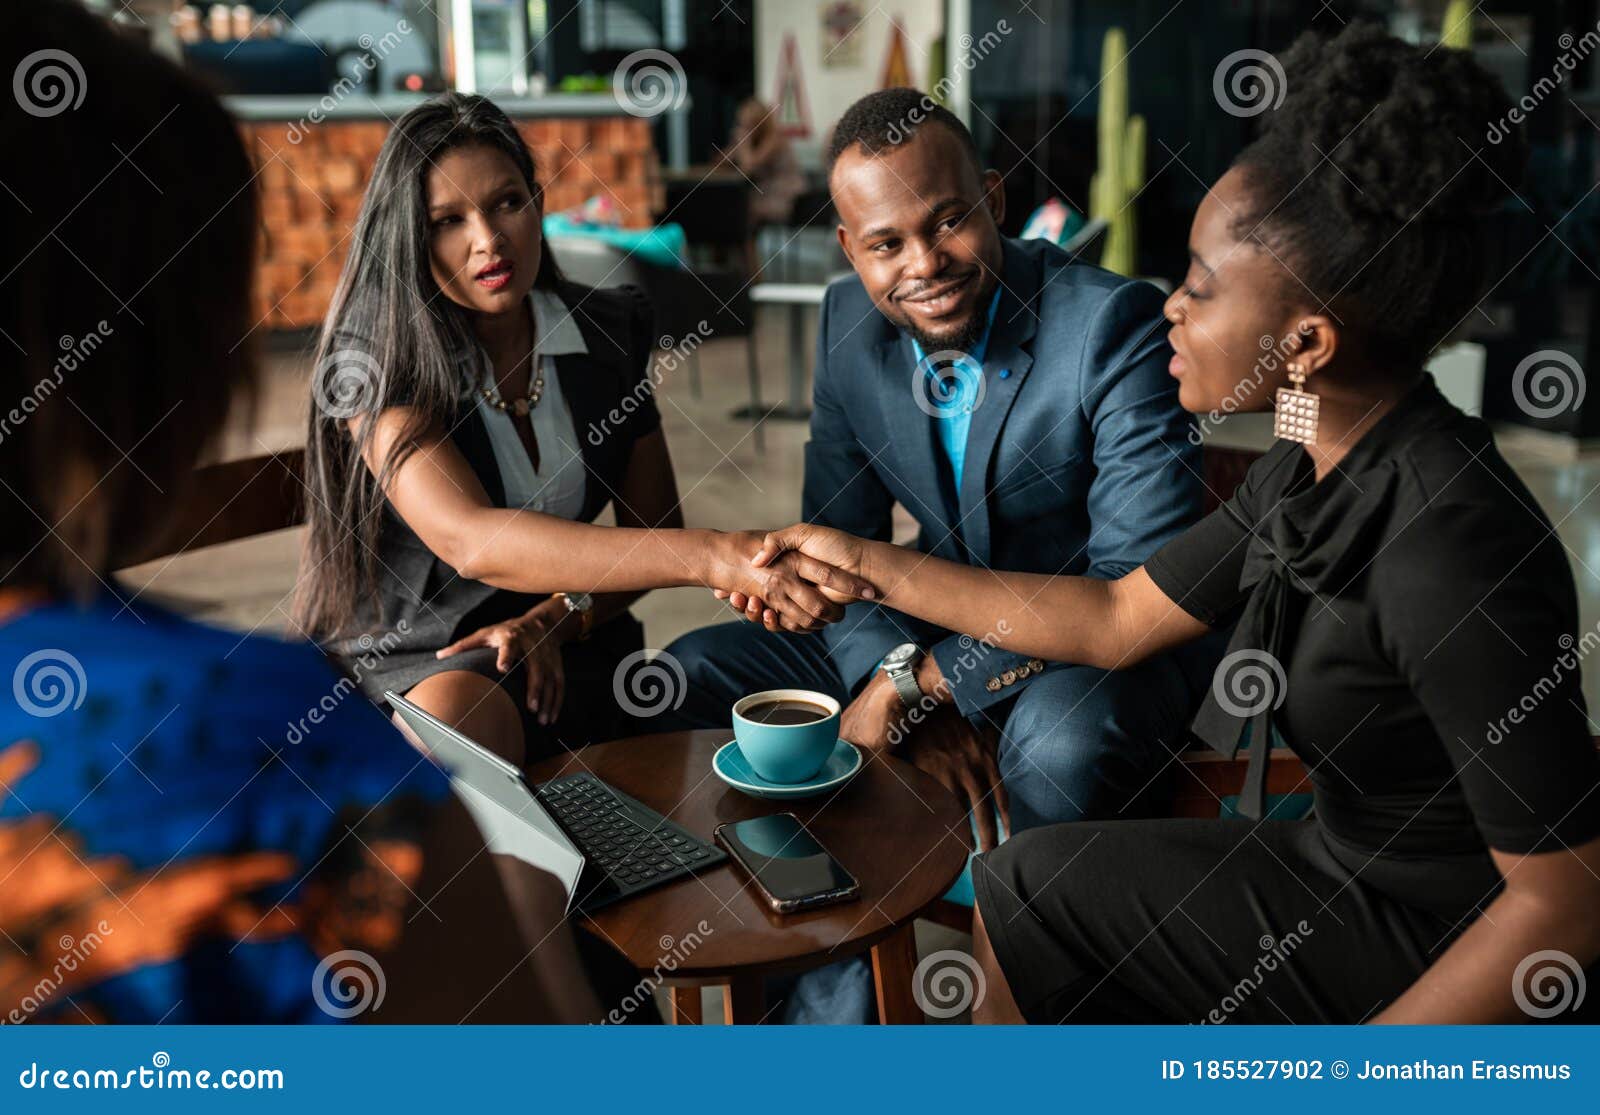 successful black south african businesswoman interview applicant shaking hands with human resources manager